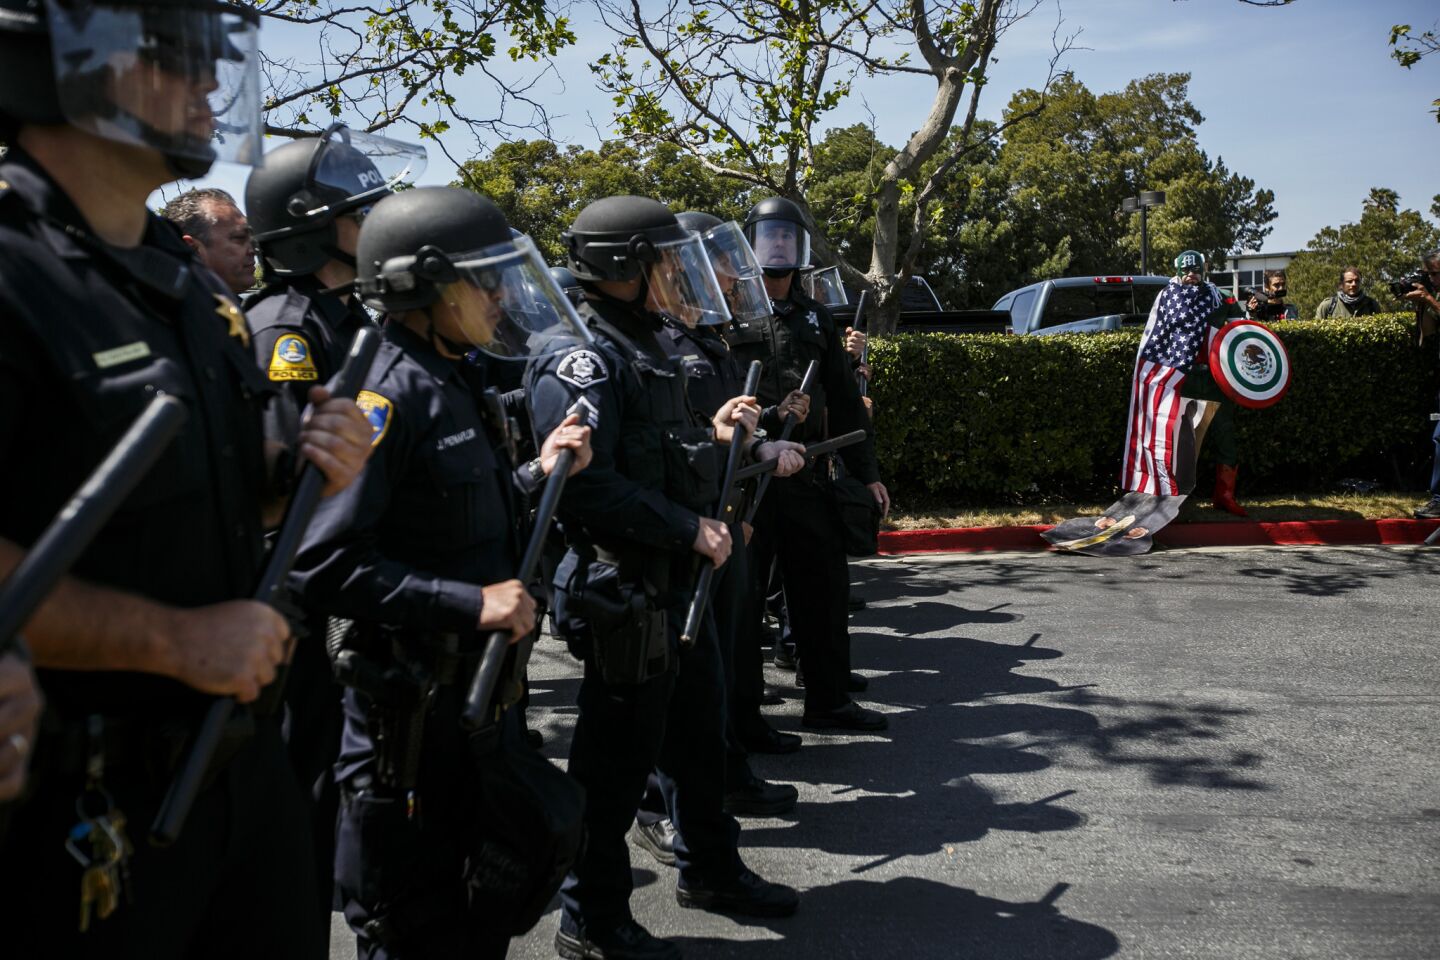 An anti-Trump protester dressed in a costume meant to parody Captain America watches as police hold a skirmish line at the California Republican Party convention in Burlingame in April 29, 2016.